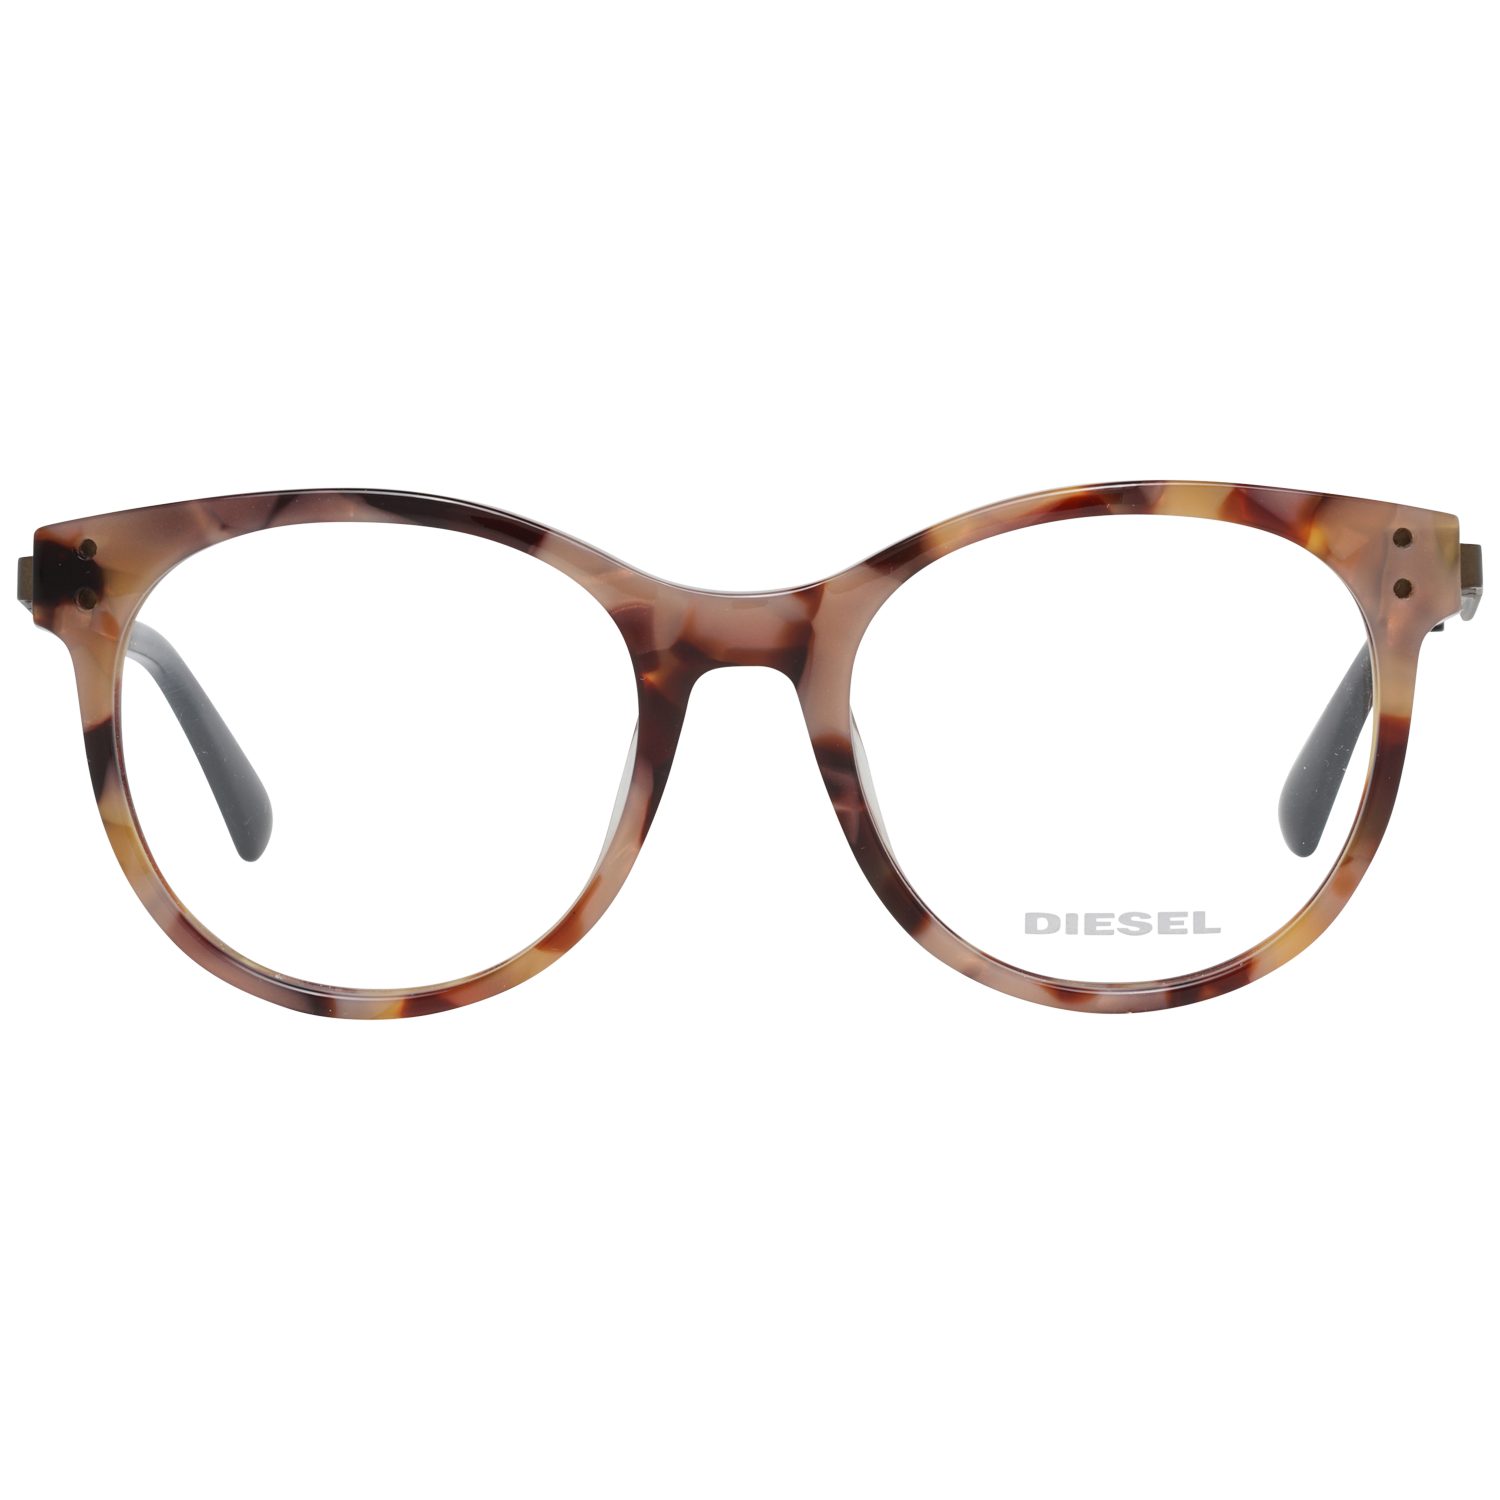 GenderWomenMain colorBrownFrame colorBrownFrame materialMetal & PlasticSize50-18-140Lenses width50mmLenses heigth44mmBridge length18mmFrame width140mmTemple length140mmShipment includesCase, Cleaning clothStyleFull-RimSpring hingeNoExtraNo extra